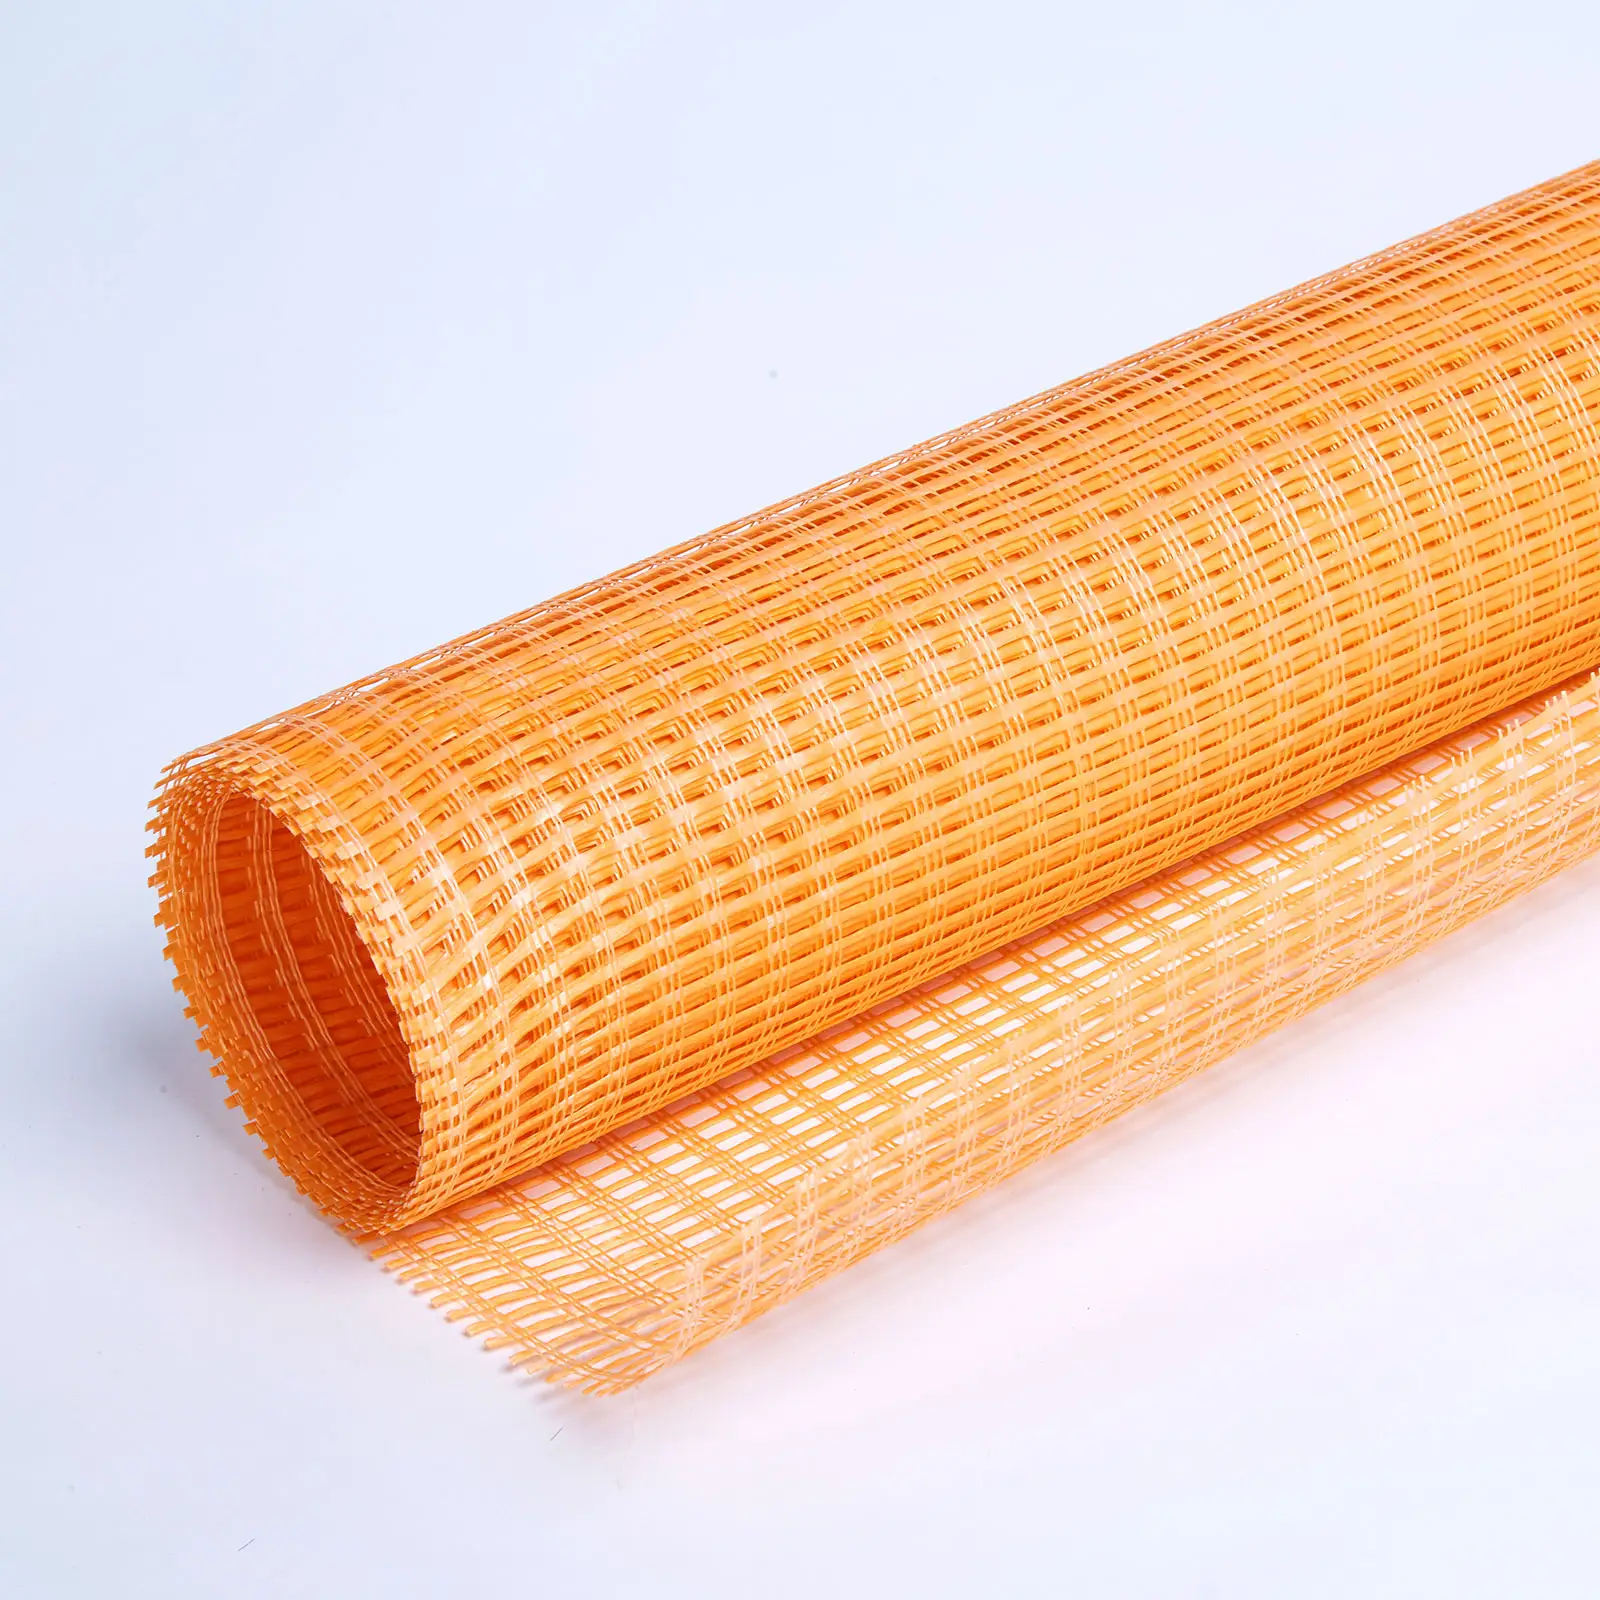 Hot selling quality fiber mesh cloth for exterior insulation and finish system